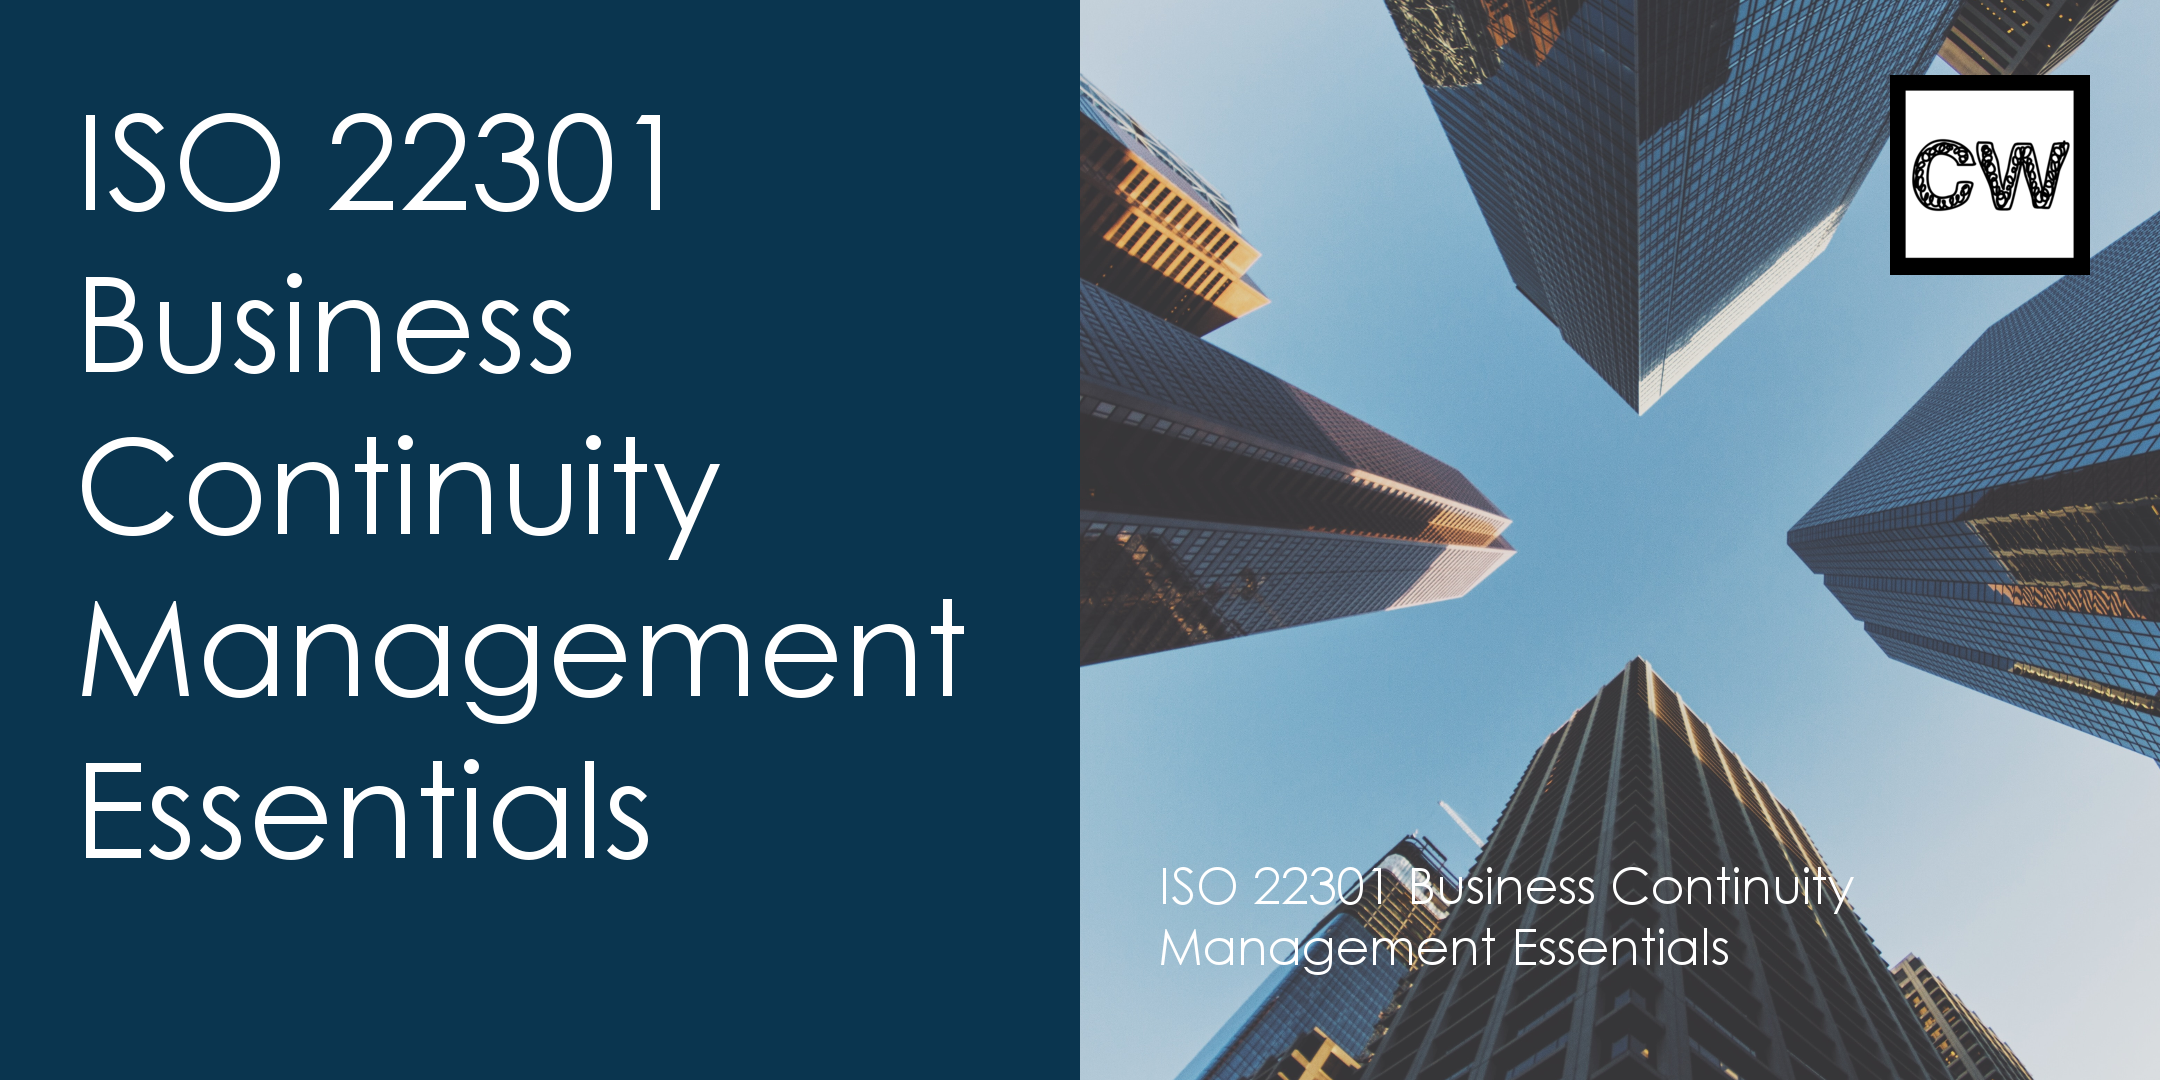 ISO 22301 Business Continuity Management-Essentials